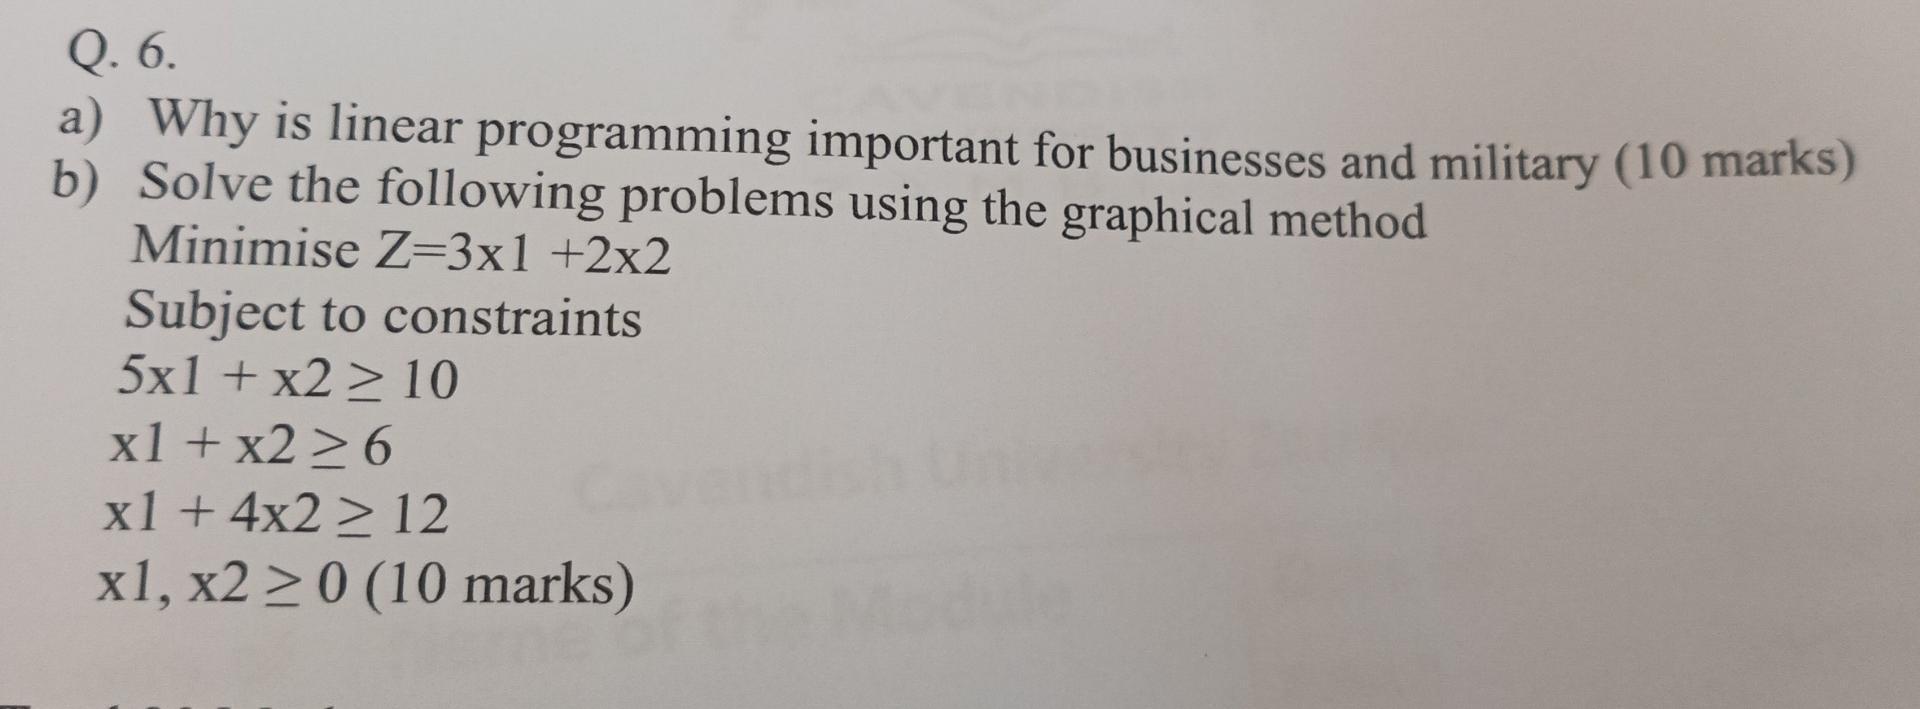 Q. 6. a) Why is linear programming important for businesses and military (10 marks) b) Solve the following